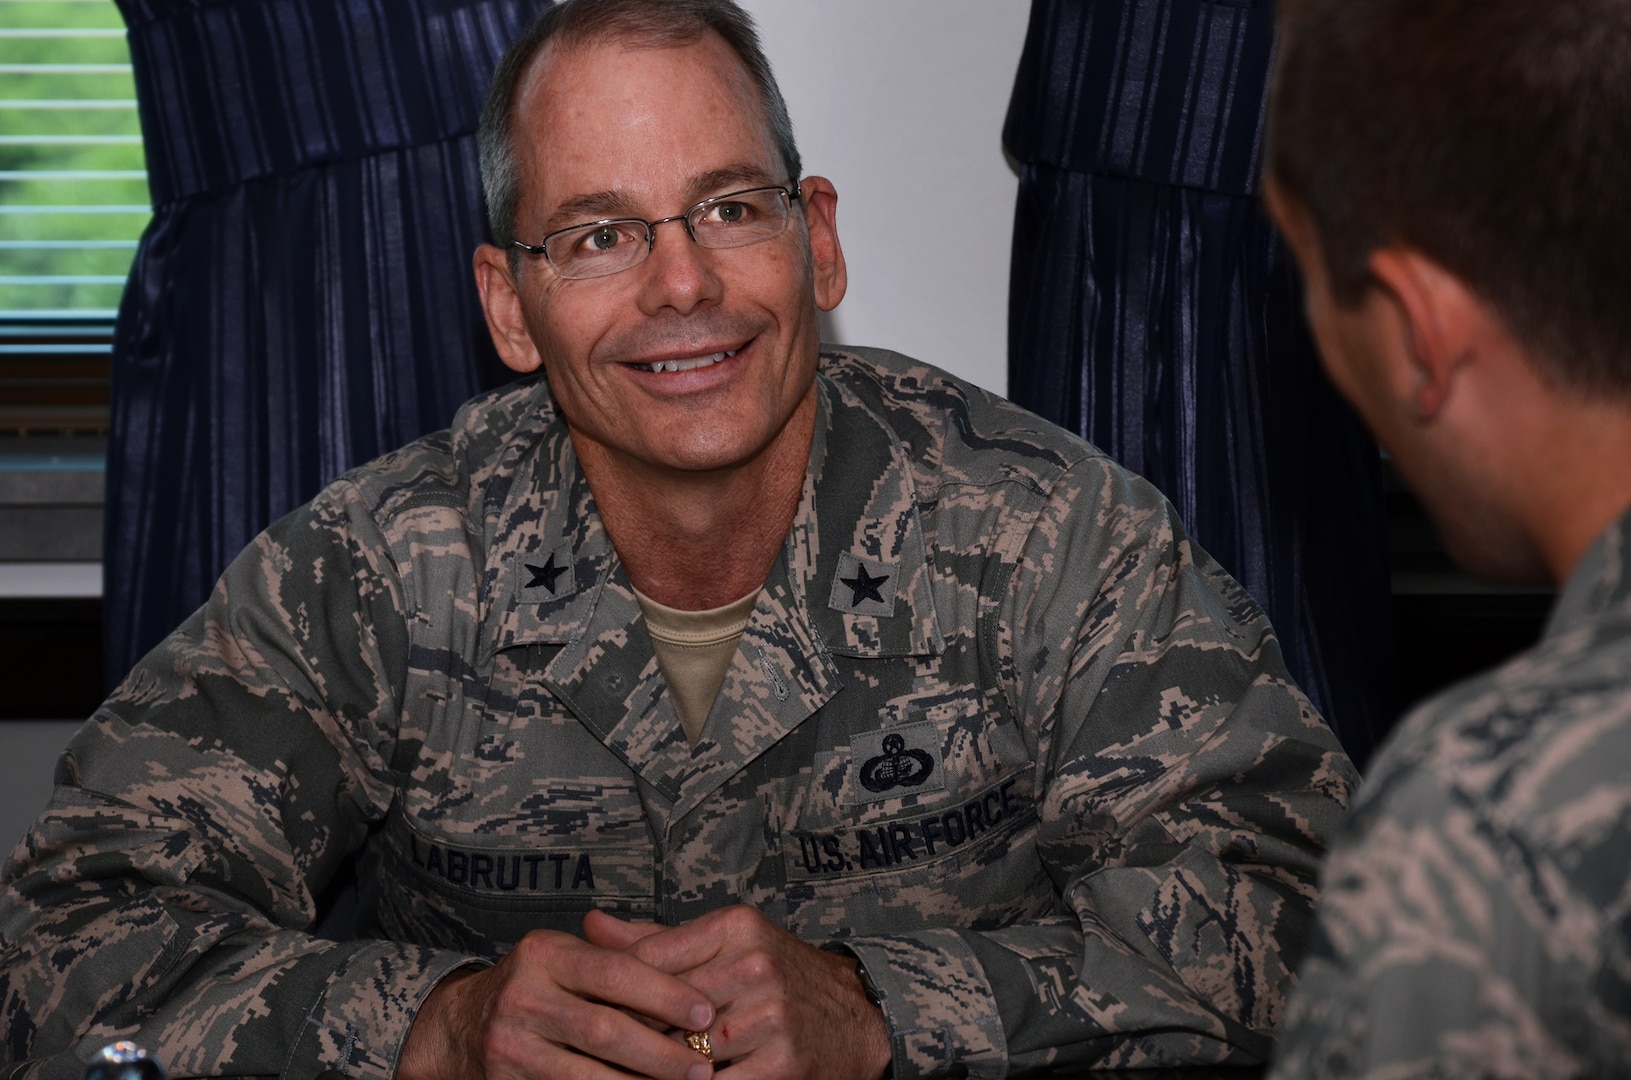 Brig. Gen. Bob LaBrutta, 502nd Air Base Wing and Joint Base San Antonio commander, said he looks forward to working with the professionals across JBSA. (U.S. Air Force photo by Leslie Shively)